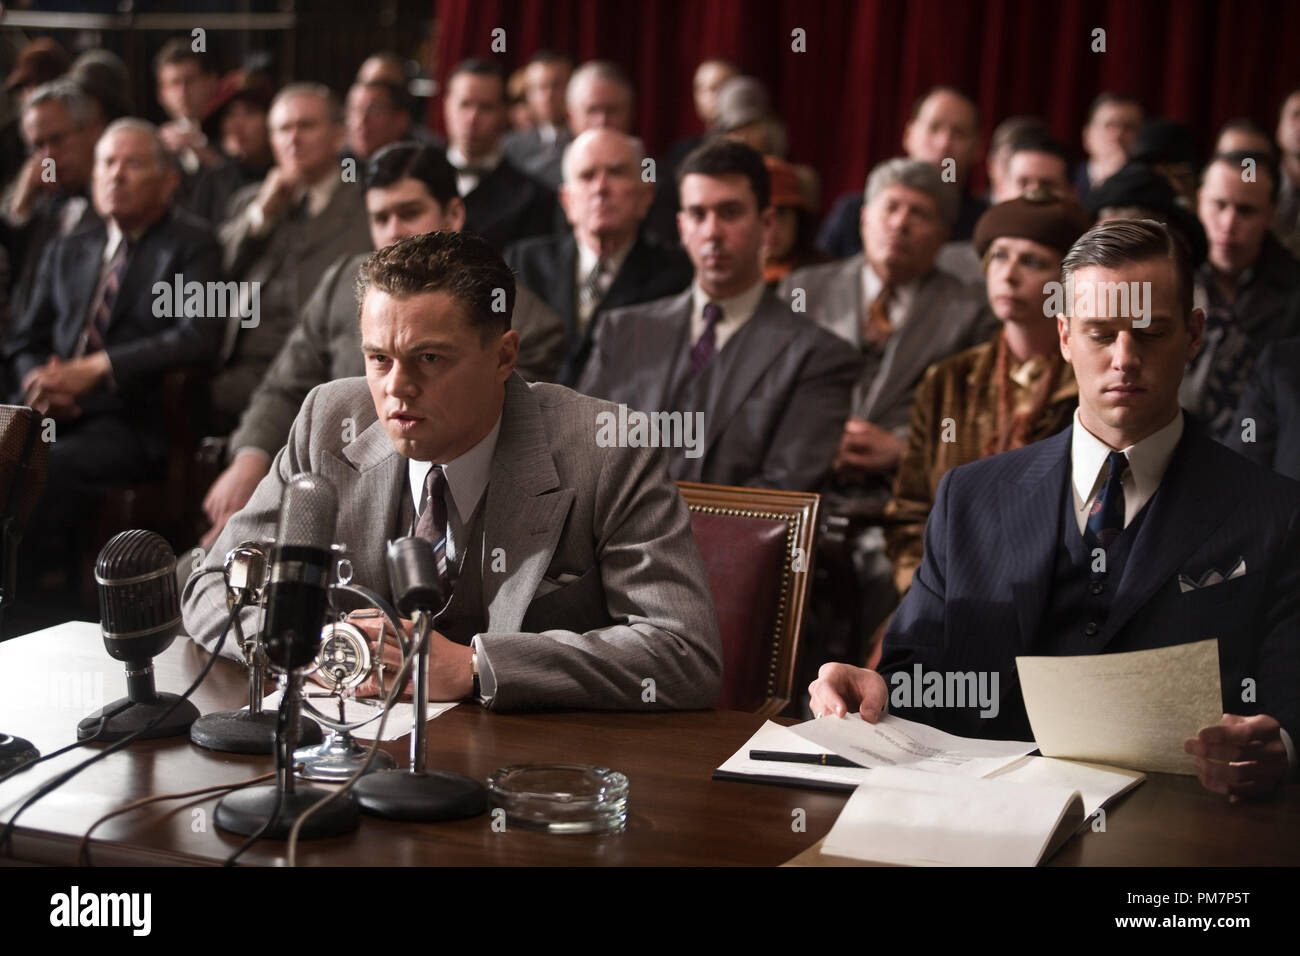 L-r) LEONARDO DiCAPRIO as J. Edgar Hoover and ARMIE HAMMER as Clyde Tolson  in Warner Bros. Pictures' drama “J. EDGAR,” a Warner Bros. Pictures release  Stock Photo - Alamy